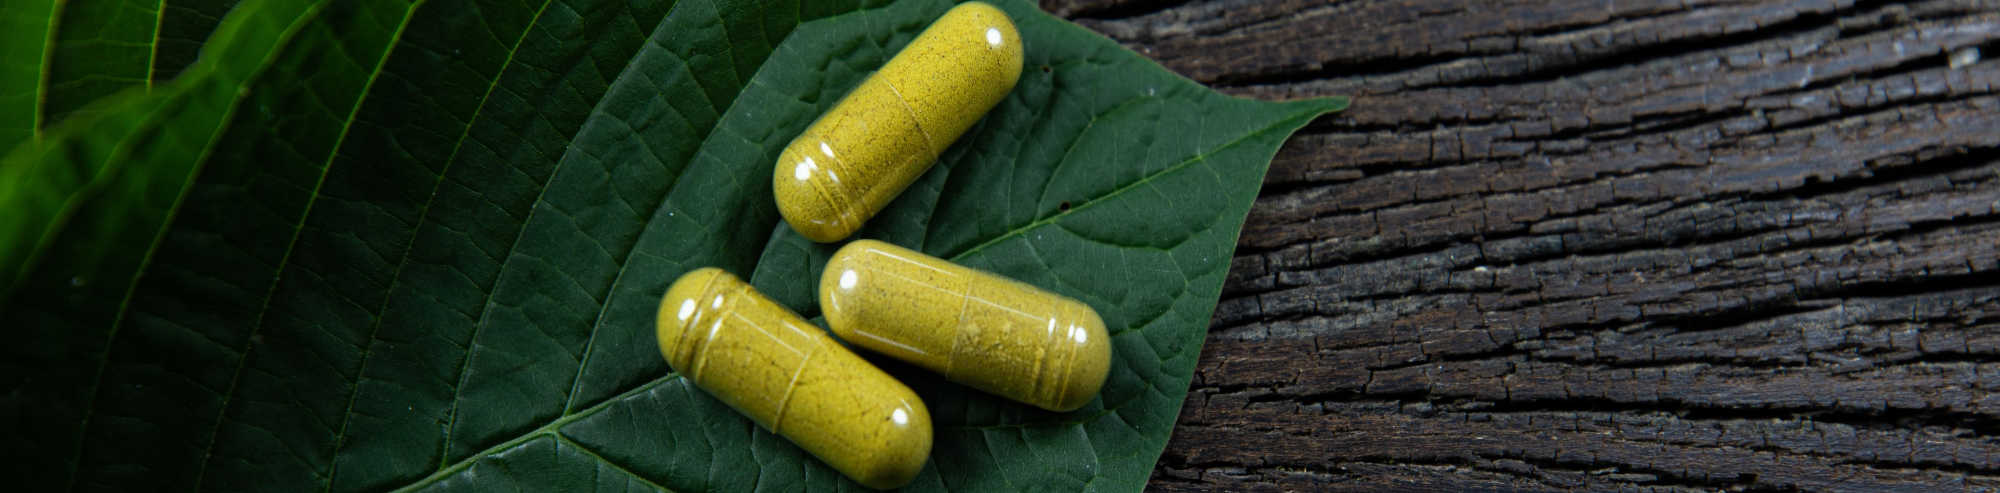 image of speciosa kratom leaves and capsules